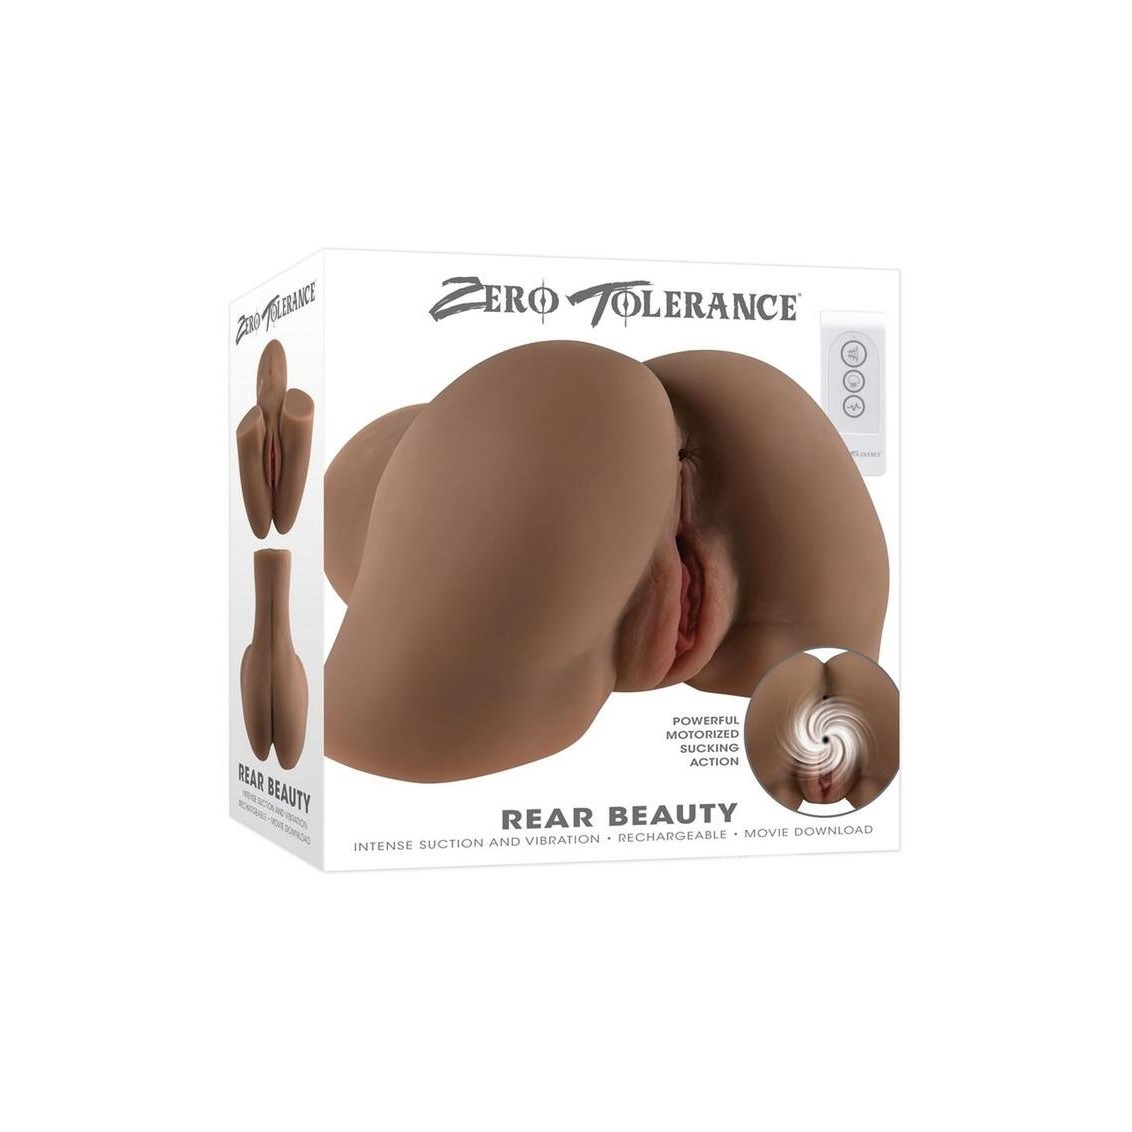 Zero Tolerance Rear Beauty Remote Controlled Life-like Vibrating and Suction Ass with Movie Download - Chocolate Sex